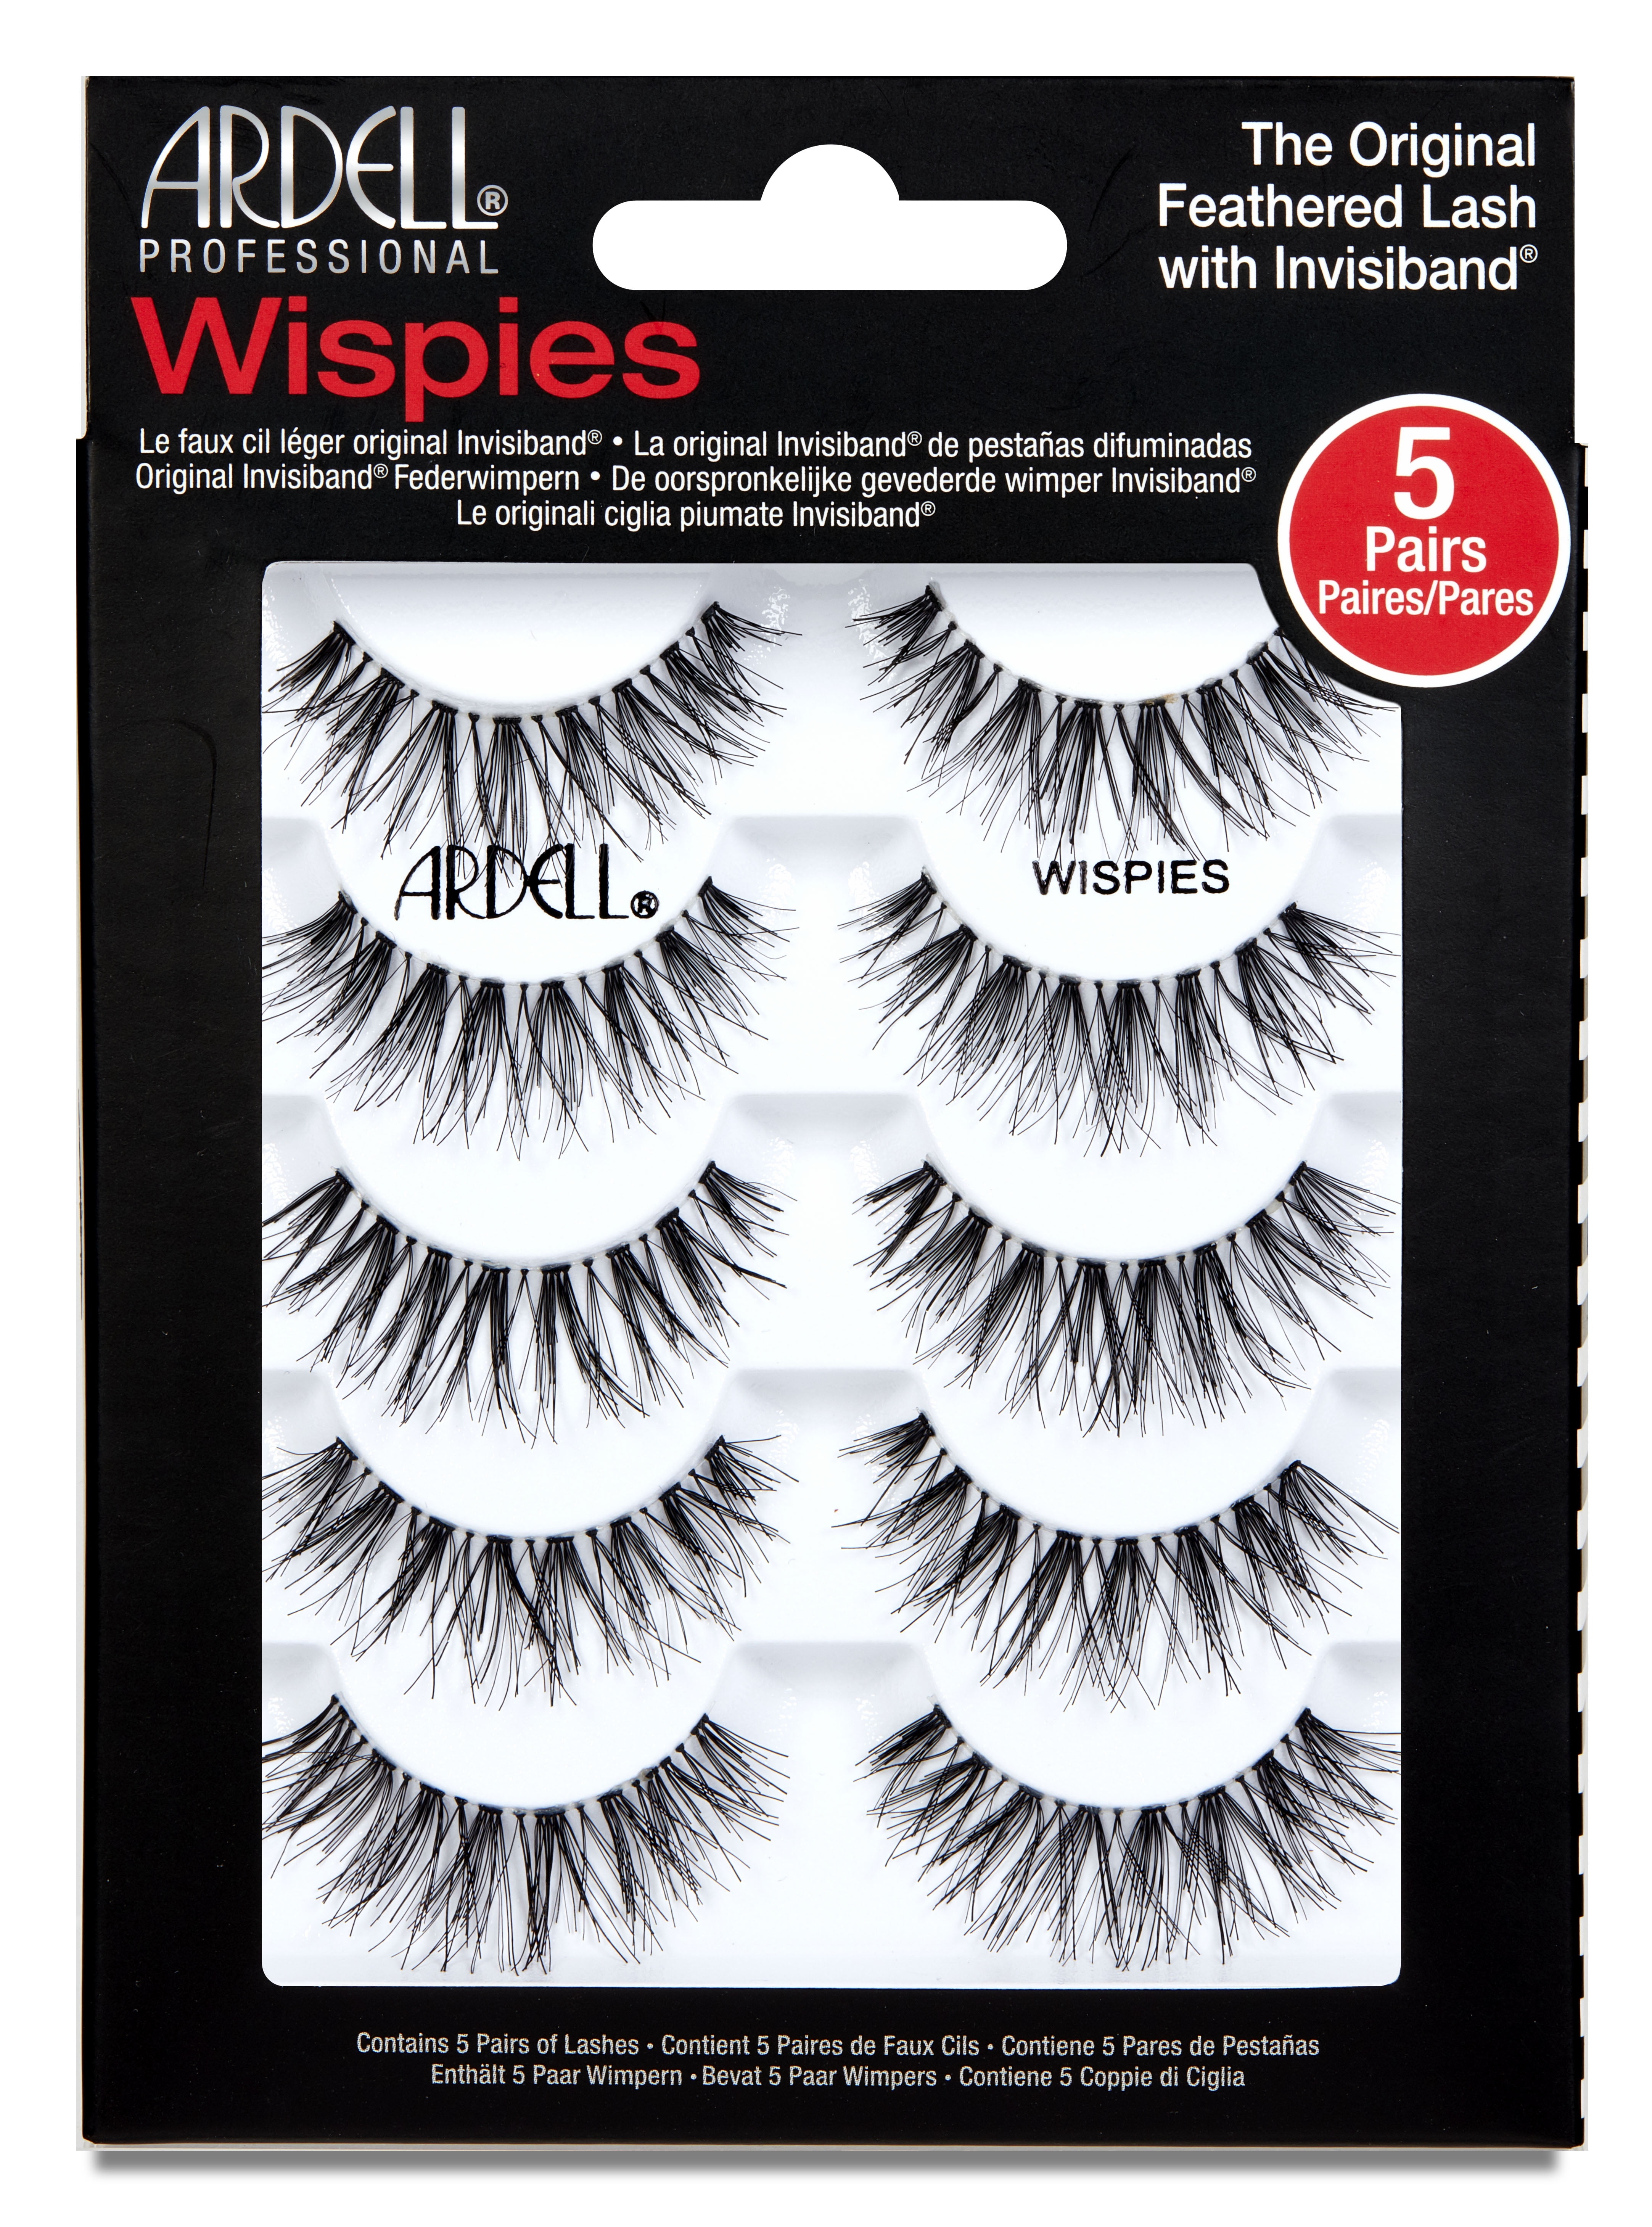 Does Walmart Sell Ardell Eyelashes?